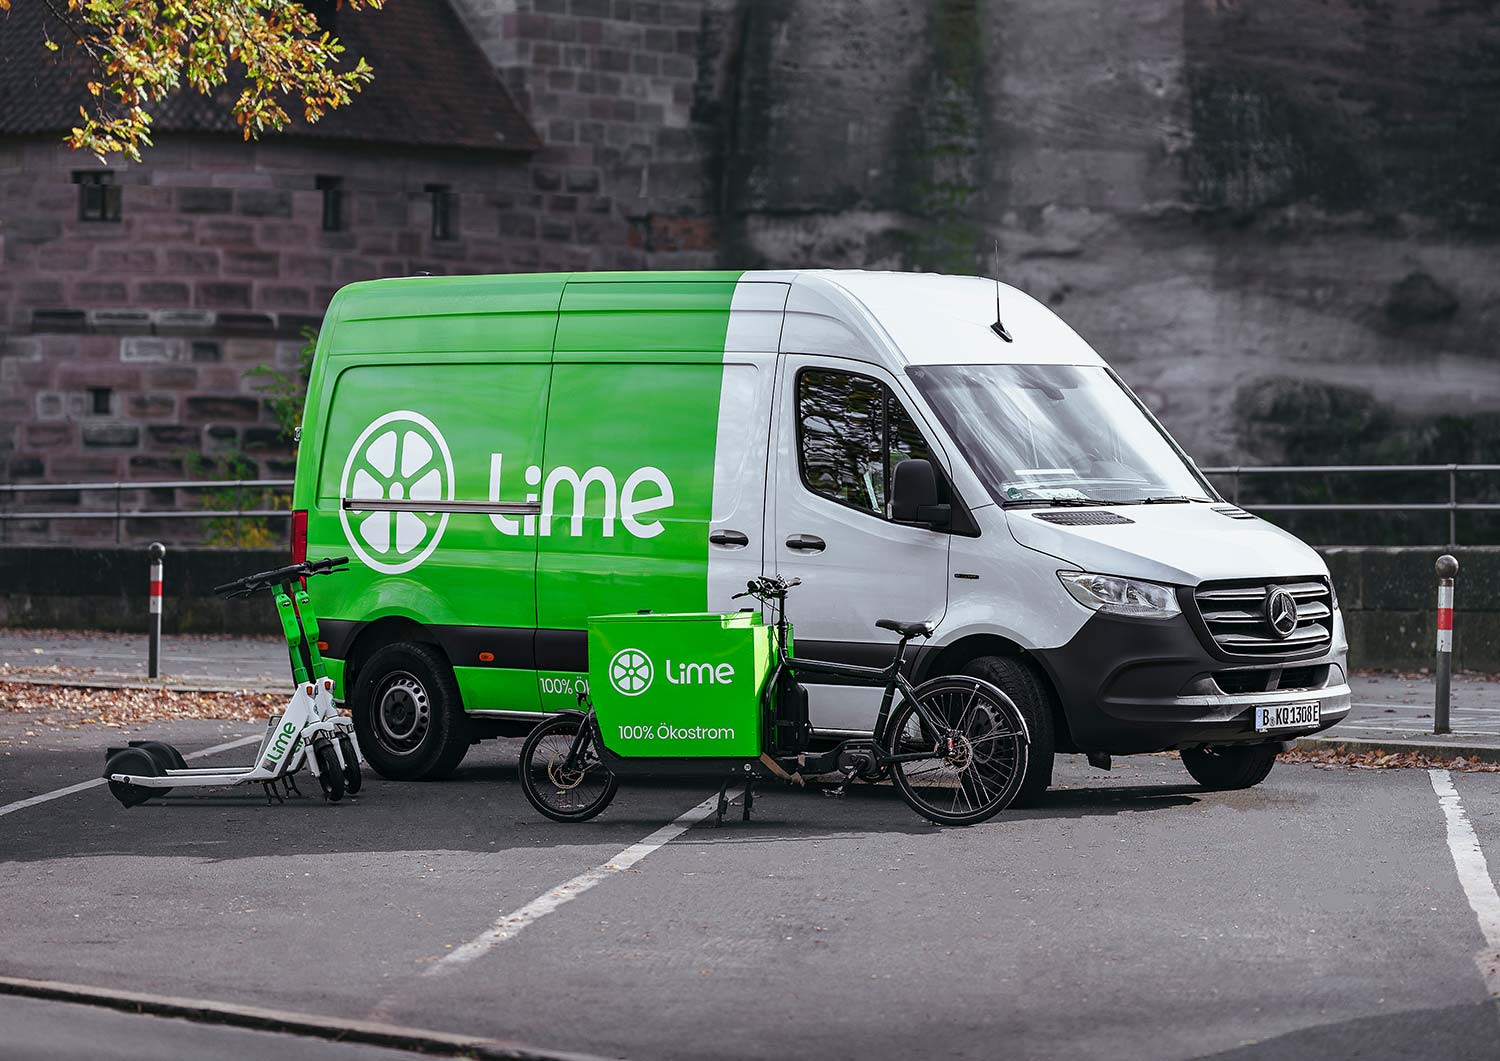 This image from Philip Reitsperger and Identity Lab shows an e-scooter, an electric bike and an e-van from Lime.